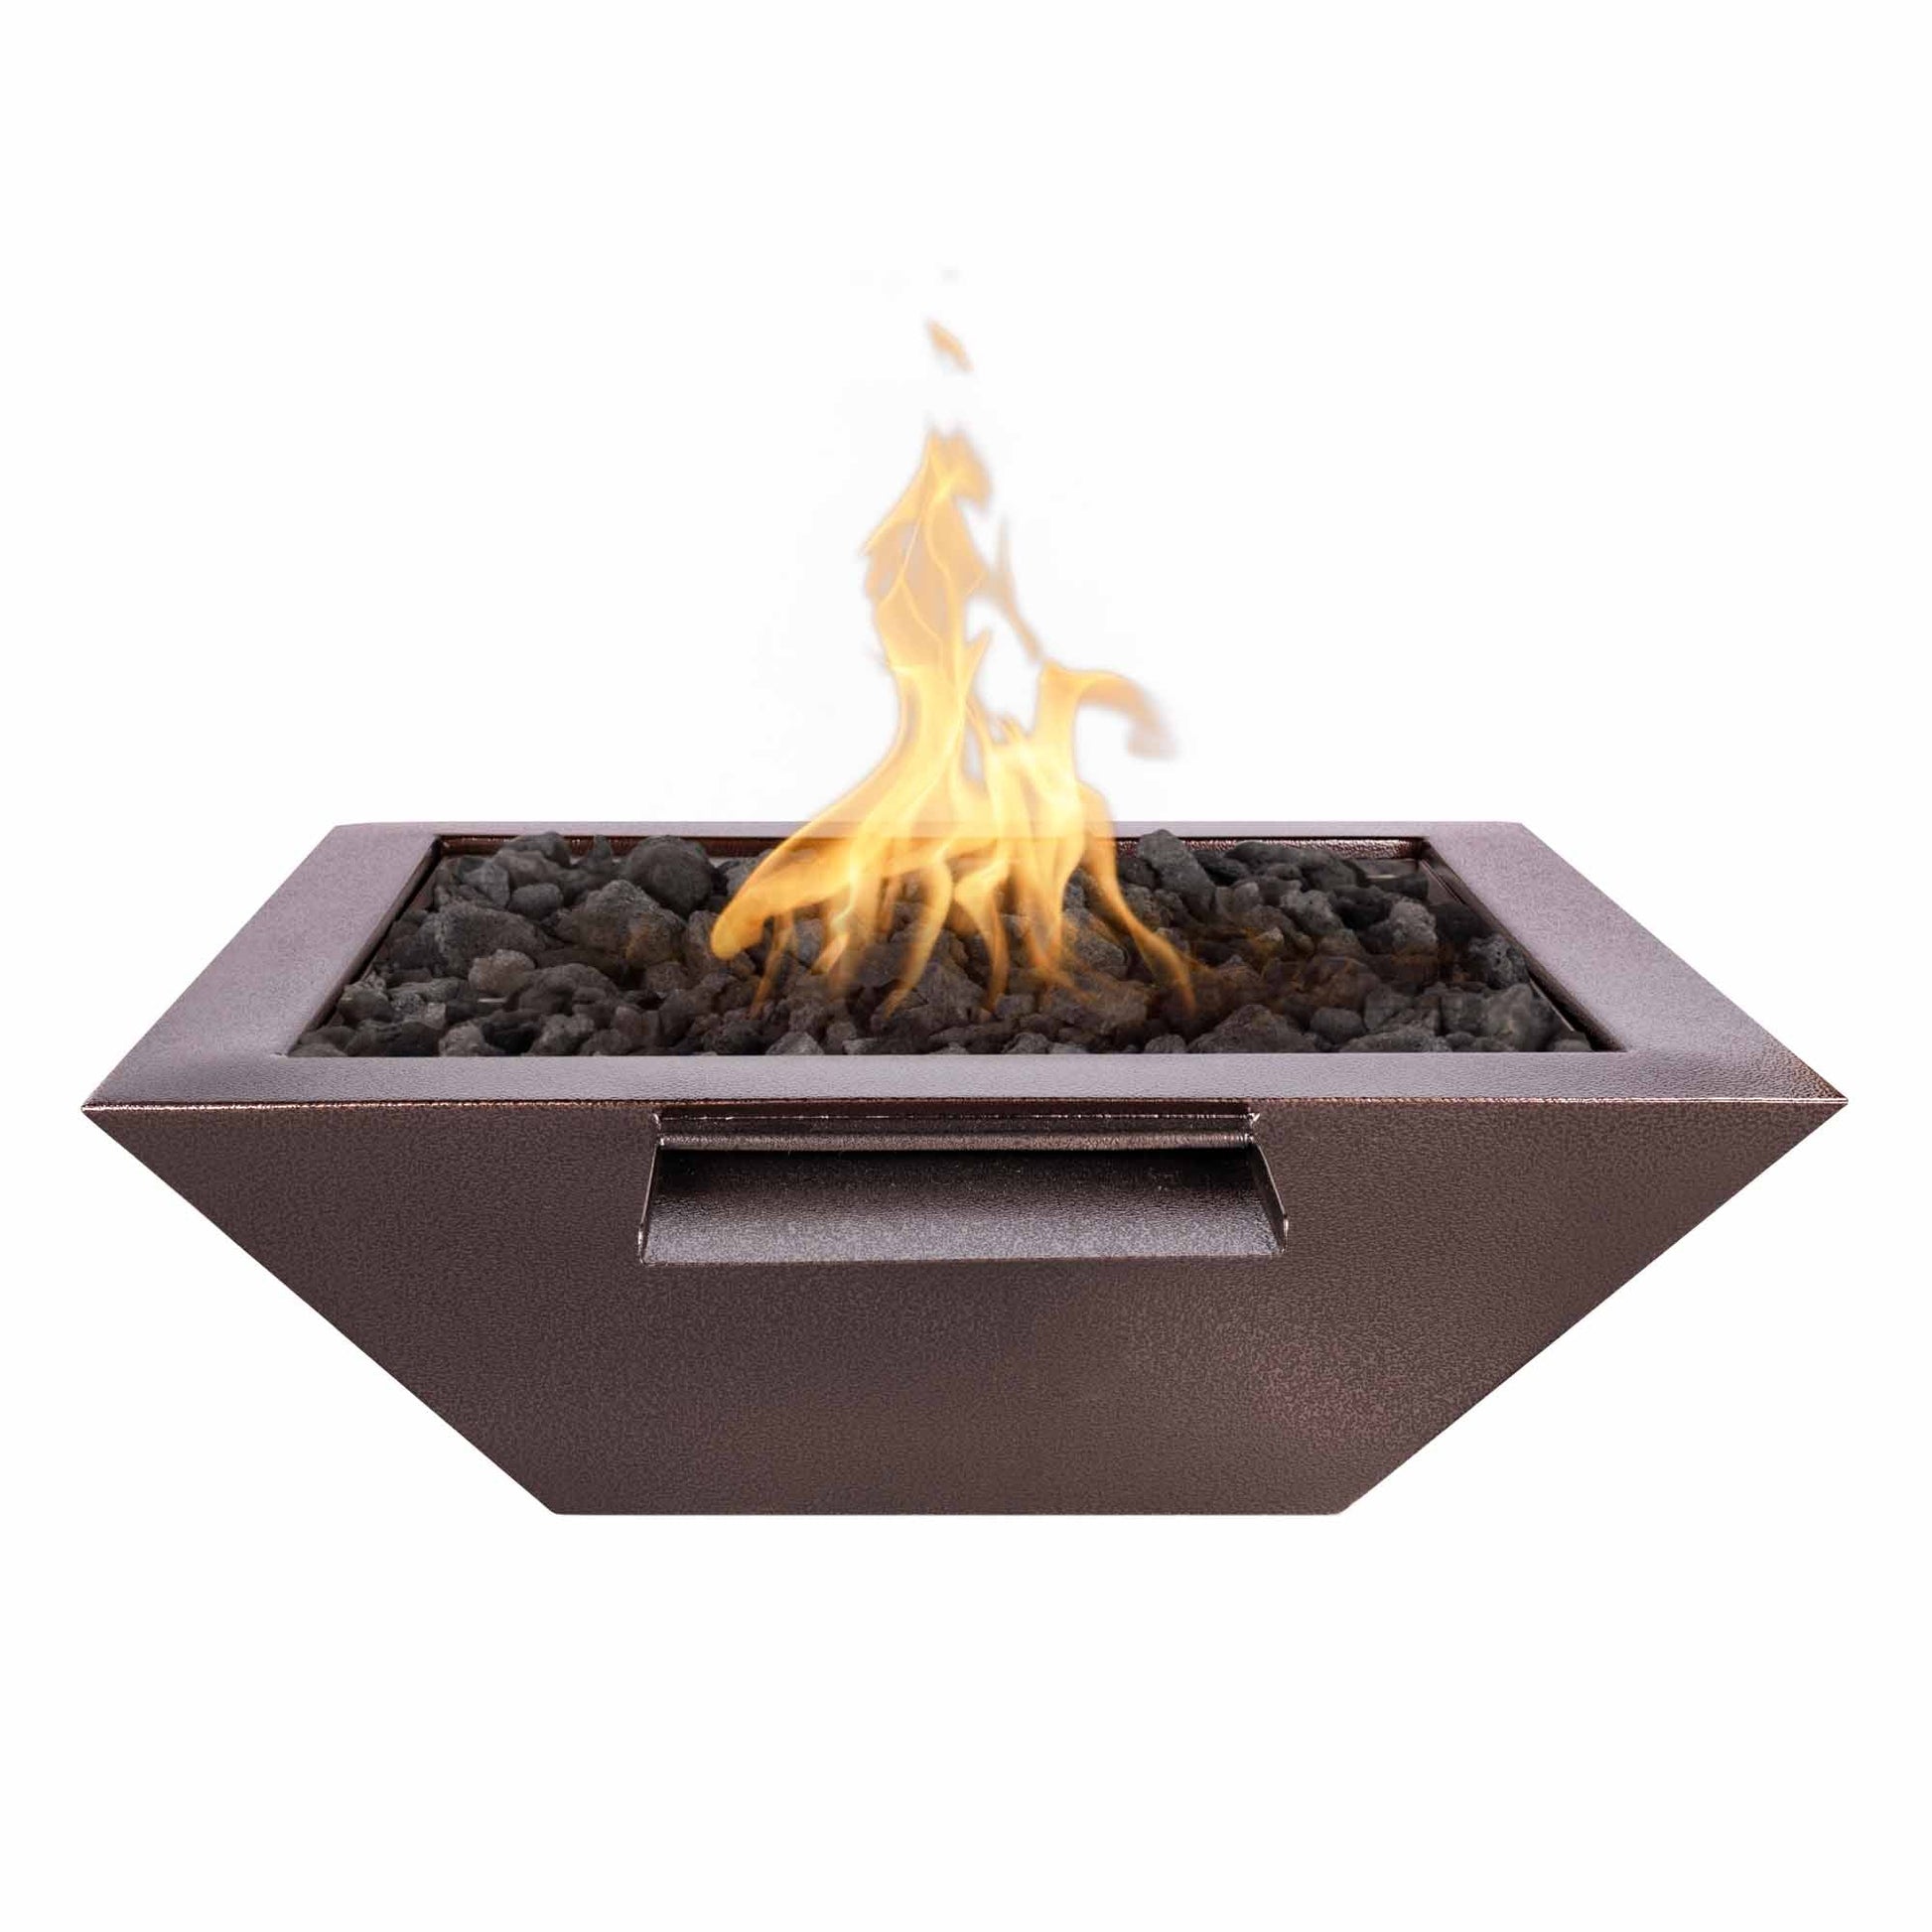 The Outdoor Plus Square Maya 24" White Powder Coated Metal Natural Gas Fire & Water Bowl with Match Lit with Flame Sense Ignition